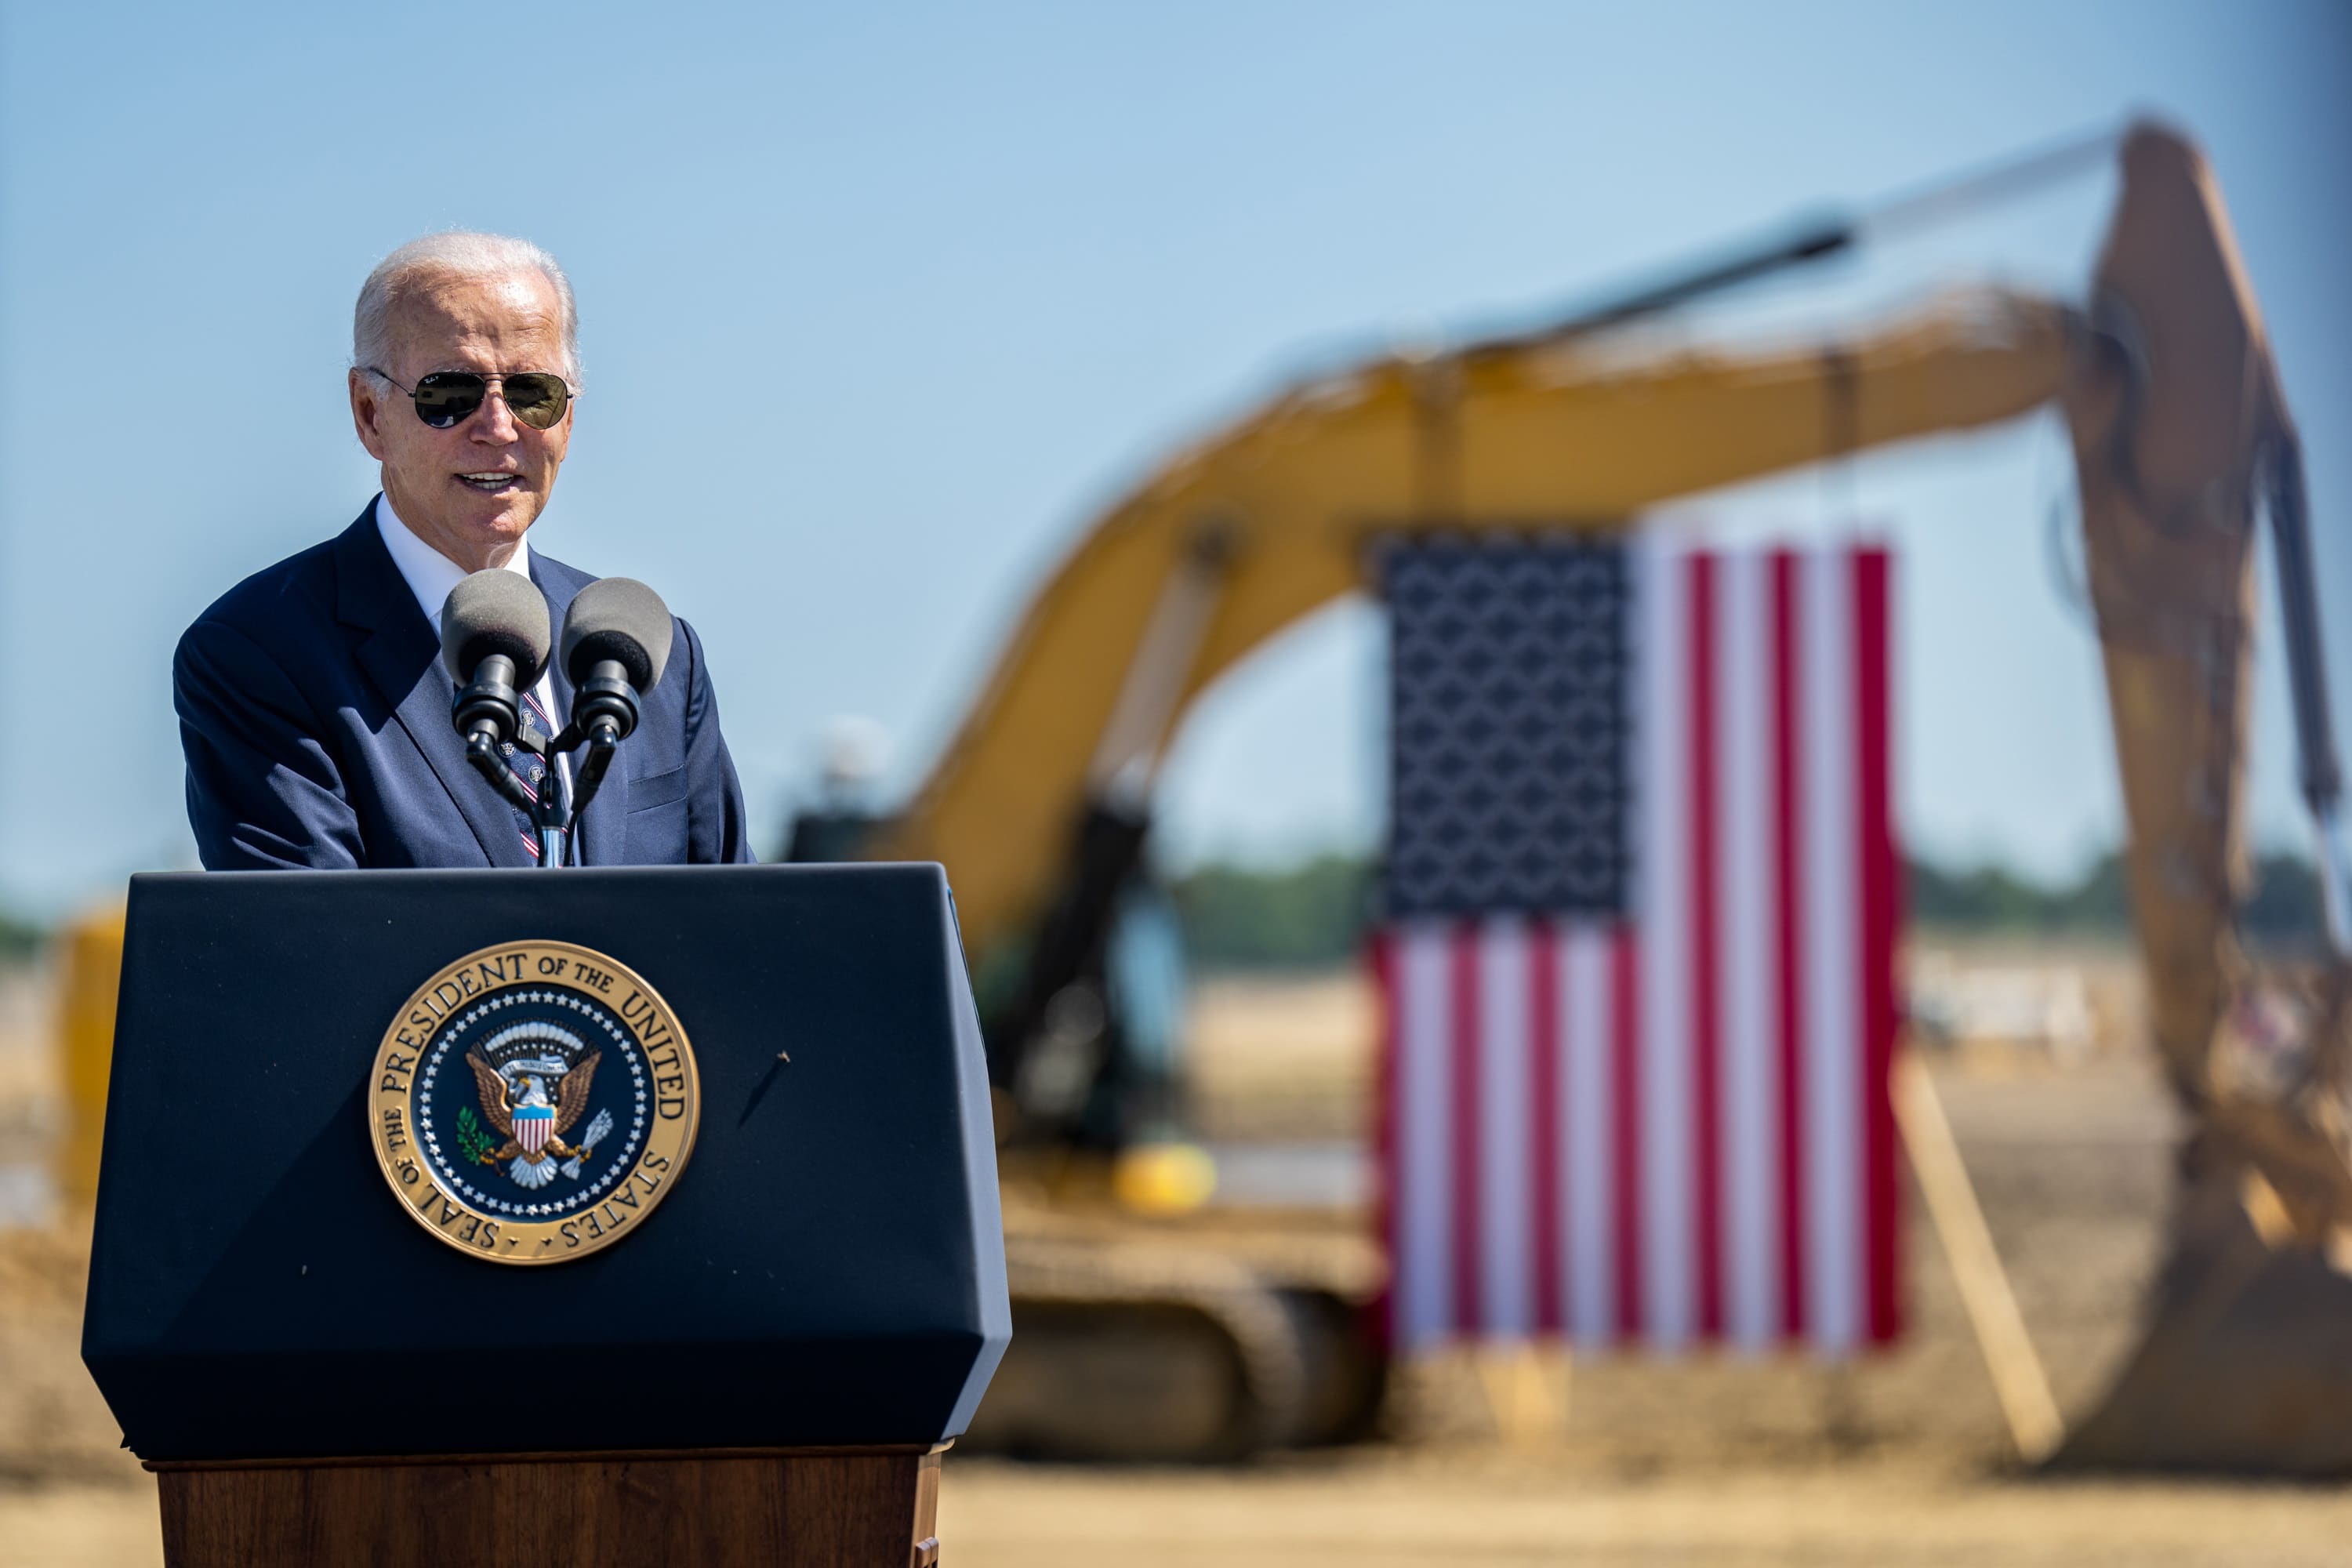 US President Joe Biden delivers remarks at the site of the new Intel semiconductor manufacturing facility in Ohio, 9 September 2022 (White House/Adam Schultz/Flickr)